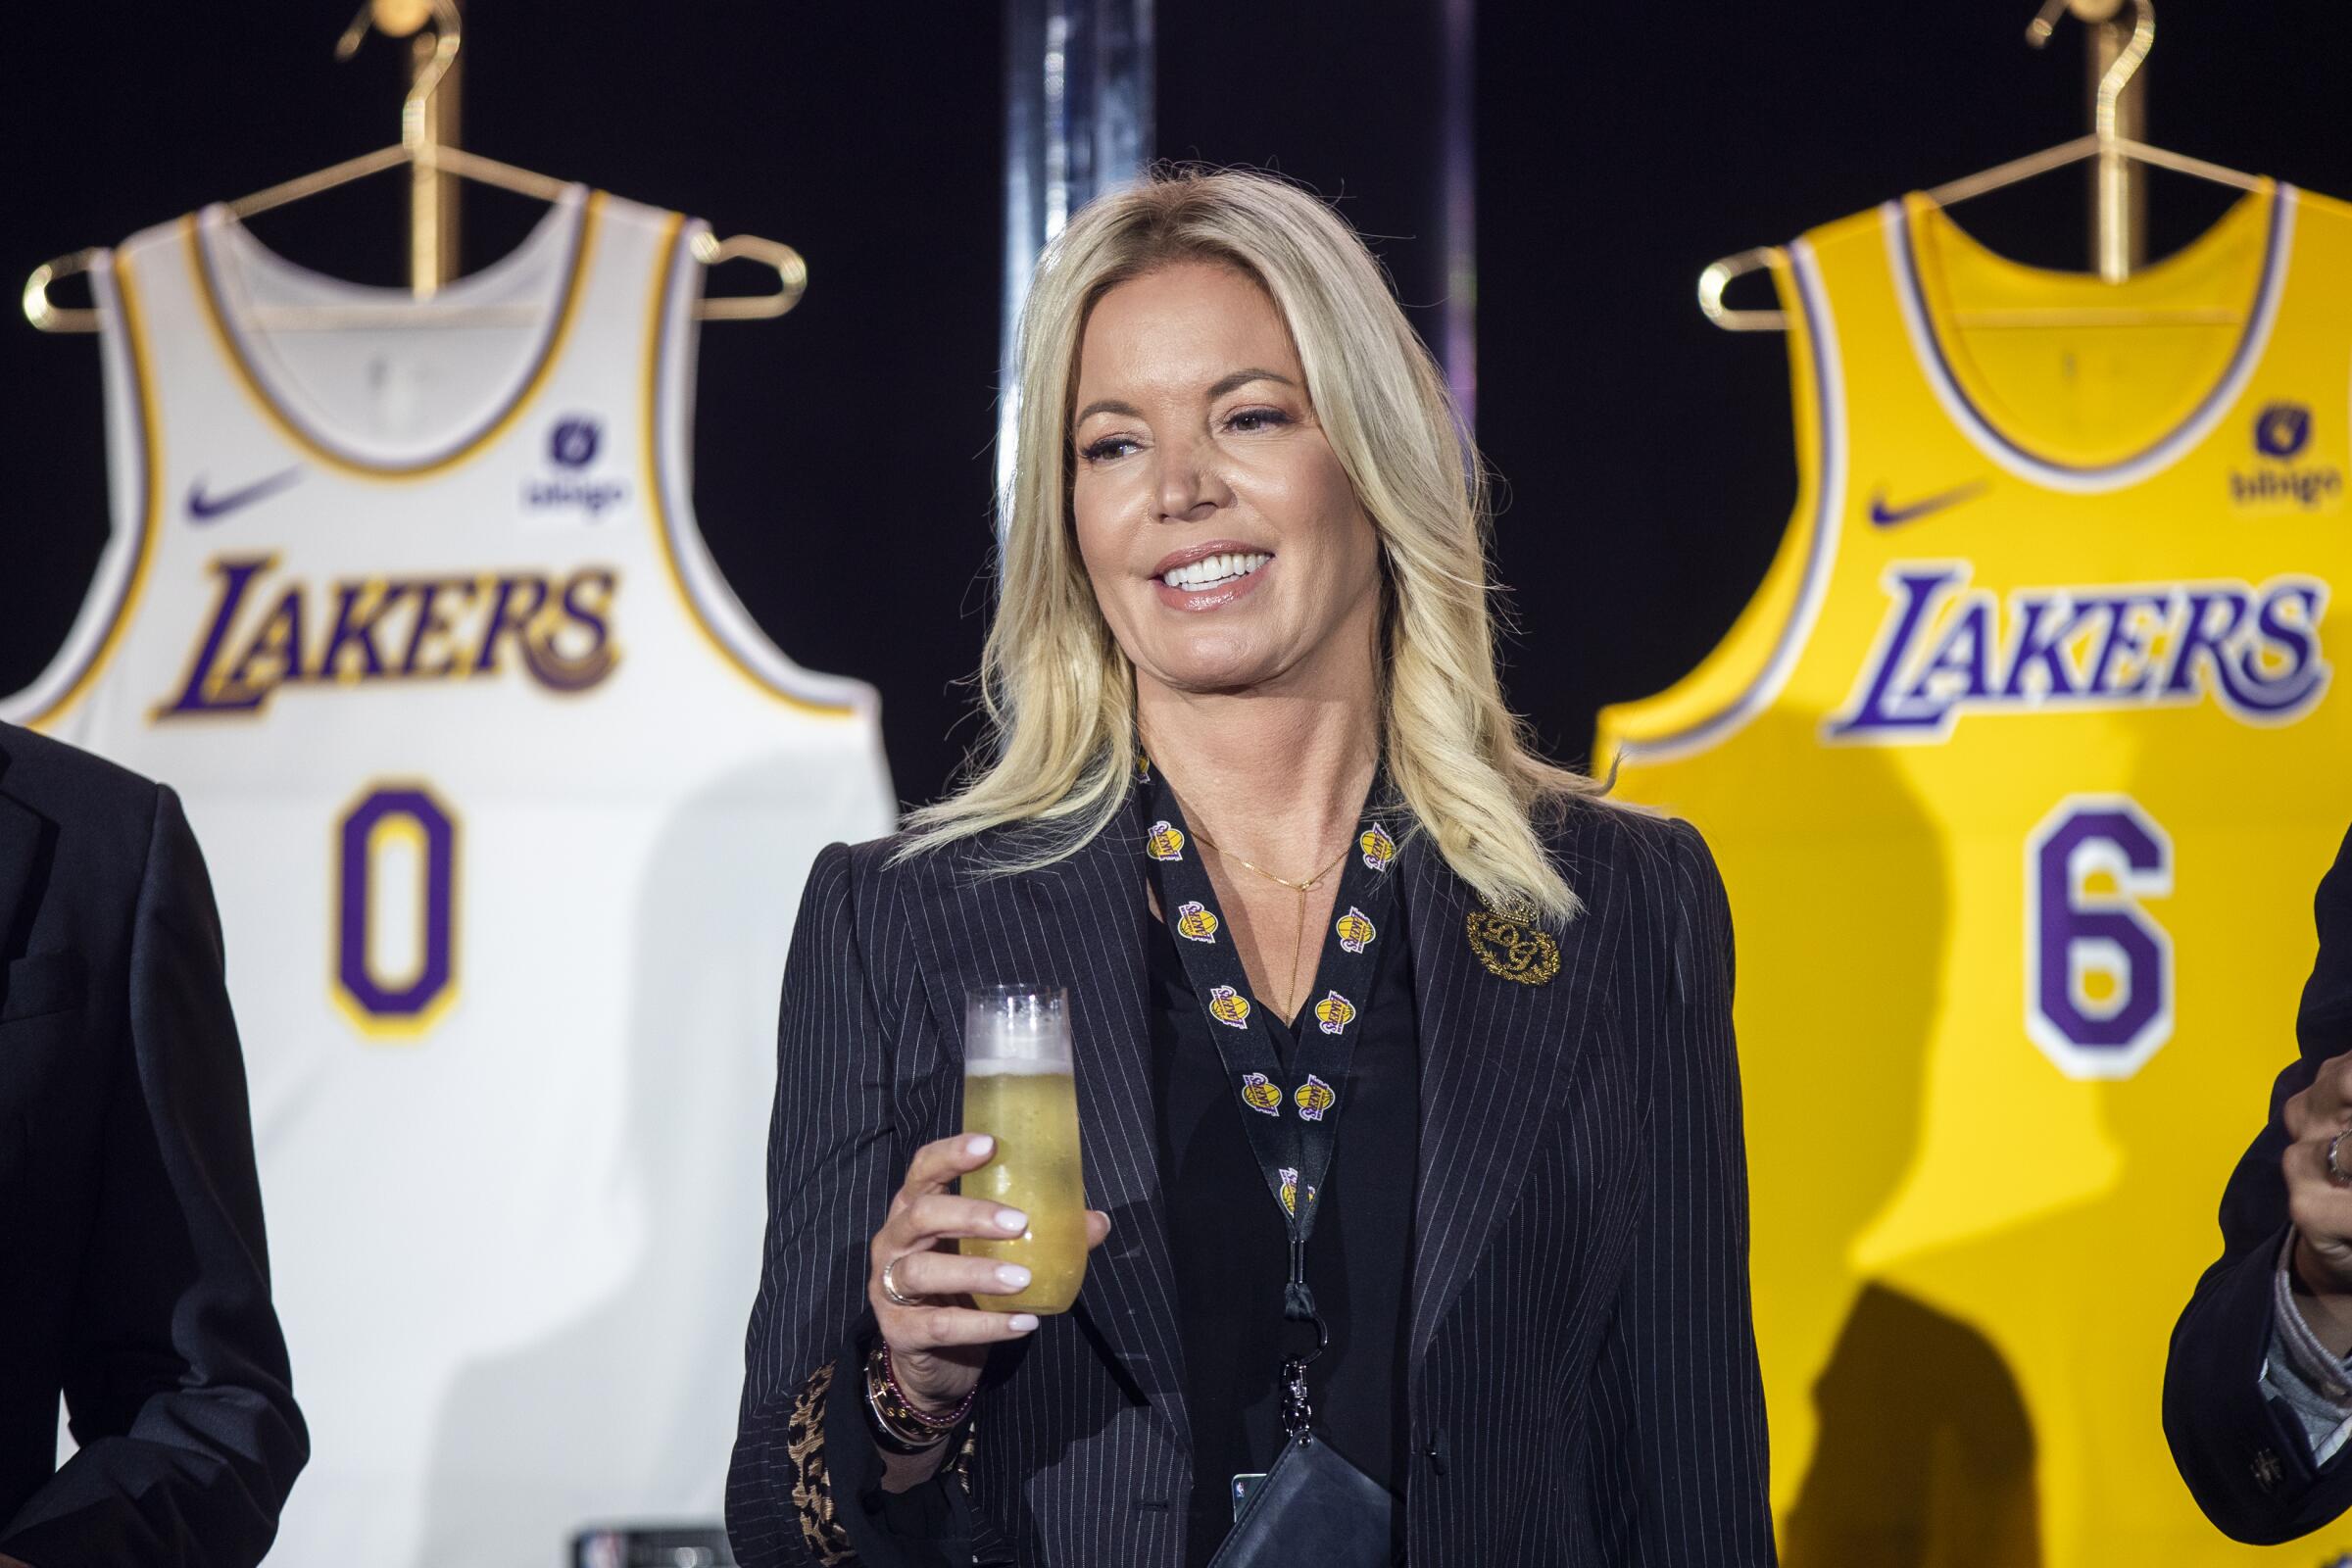 Lakers owner Jeanie Buss holds a new team jersey ahead of the 2021-2022 season 